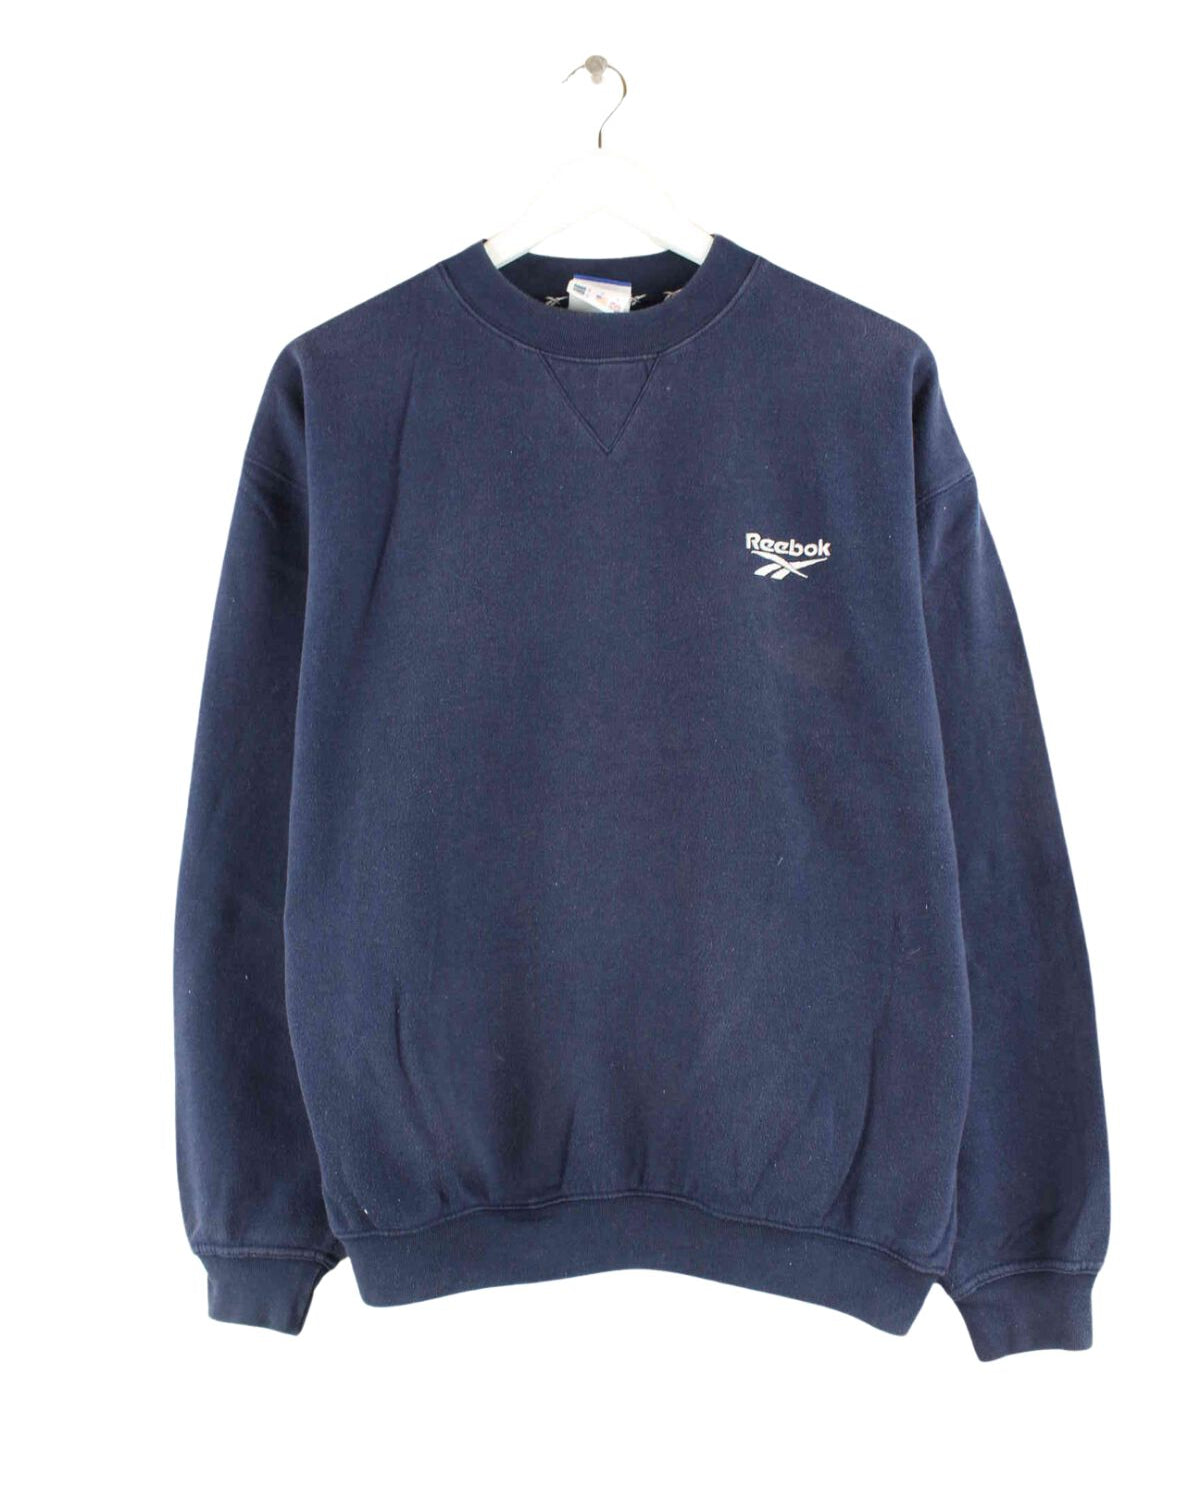 Reebok y2k Embroidered Sweater Blau M (front image)